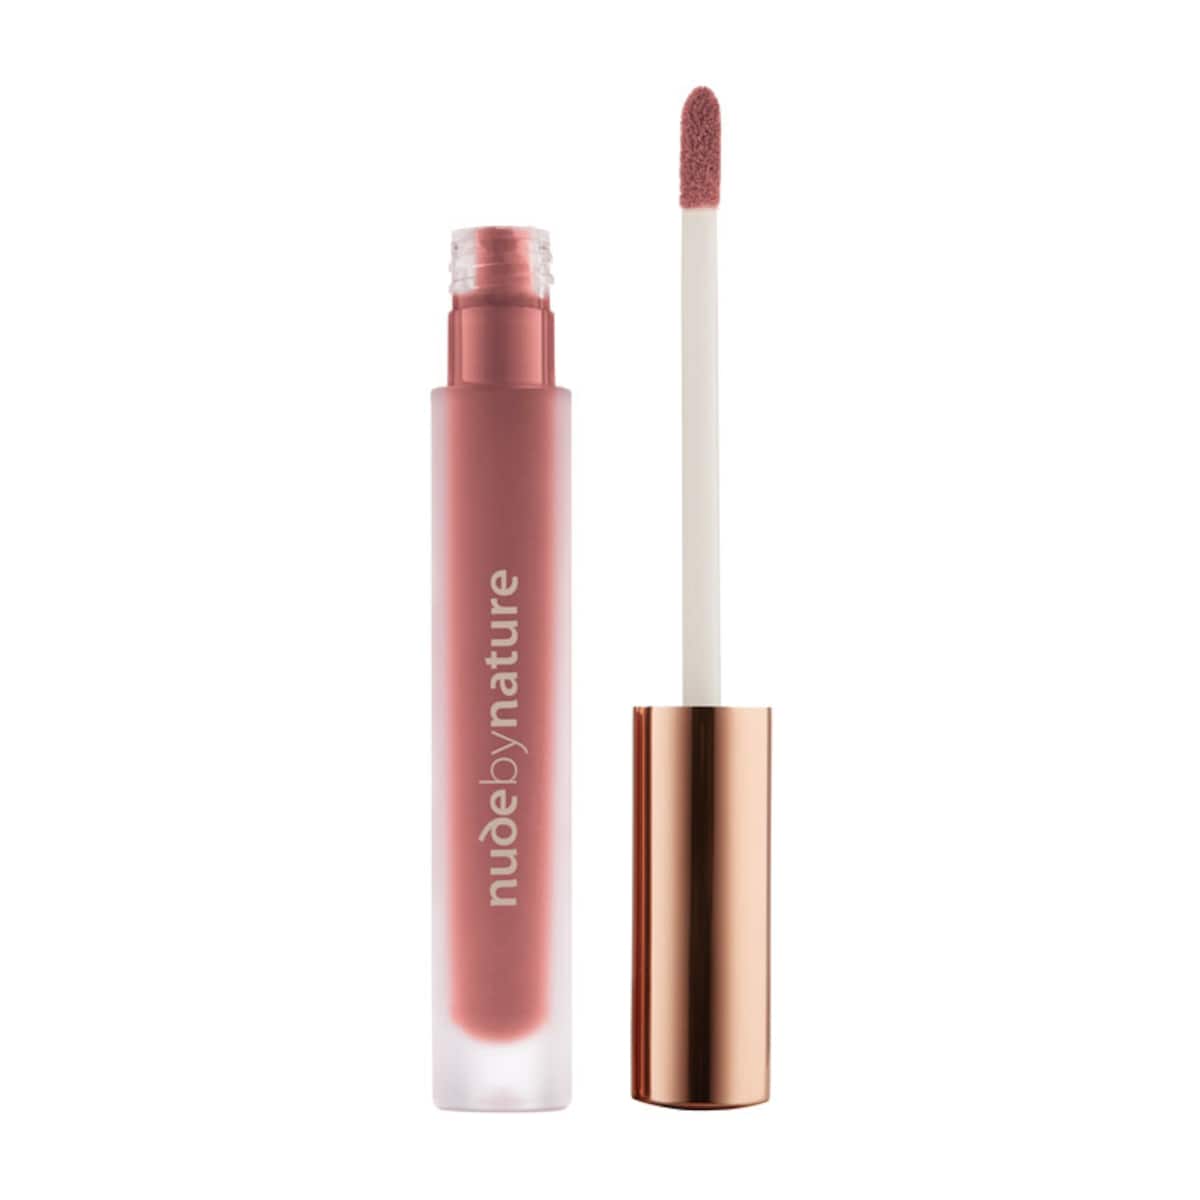 Nude by Nature Satin Liquid Lipstick 03 Natural